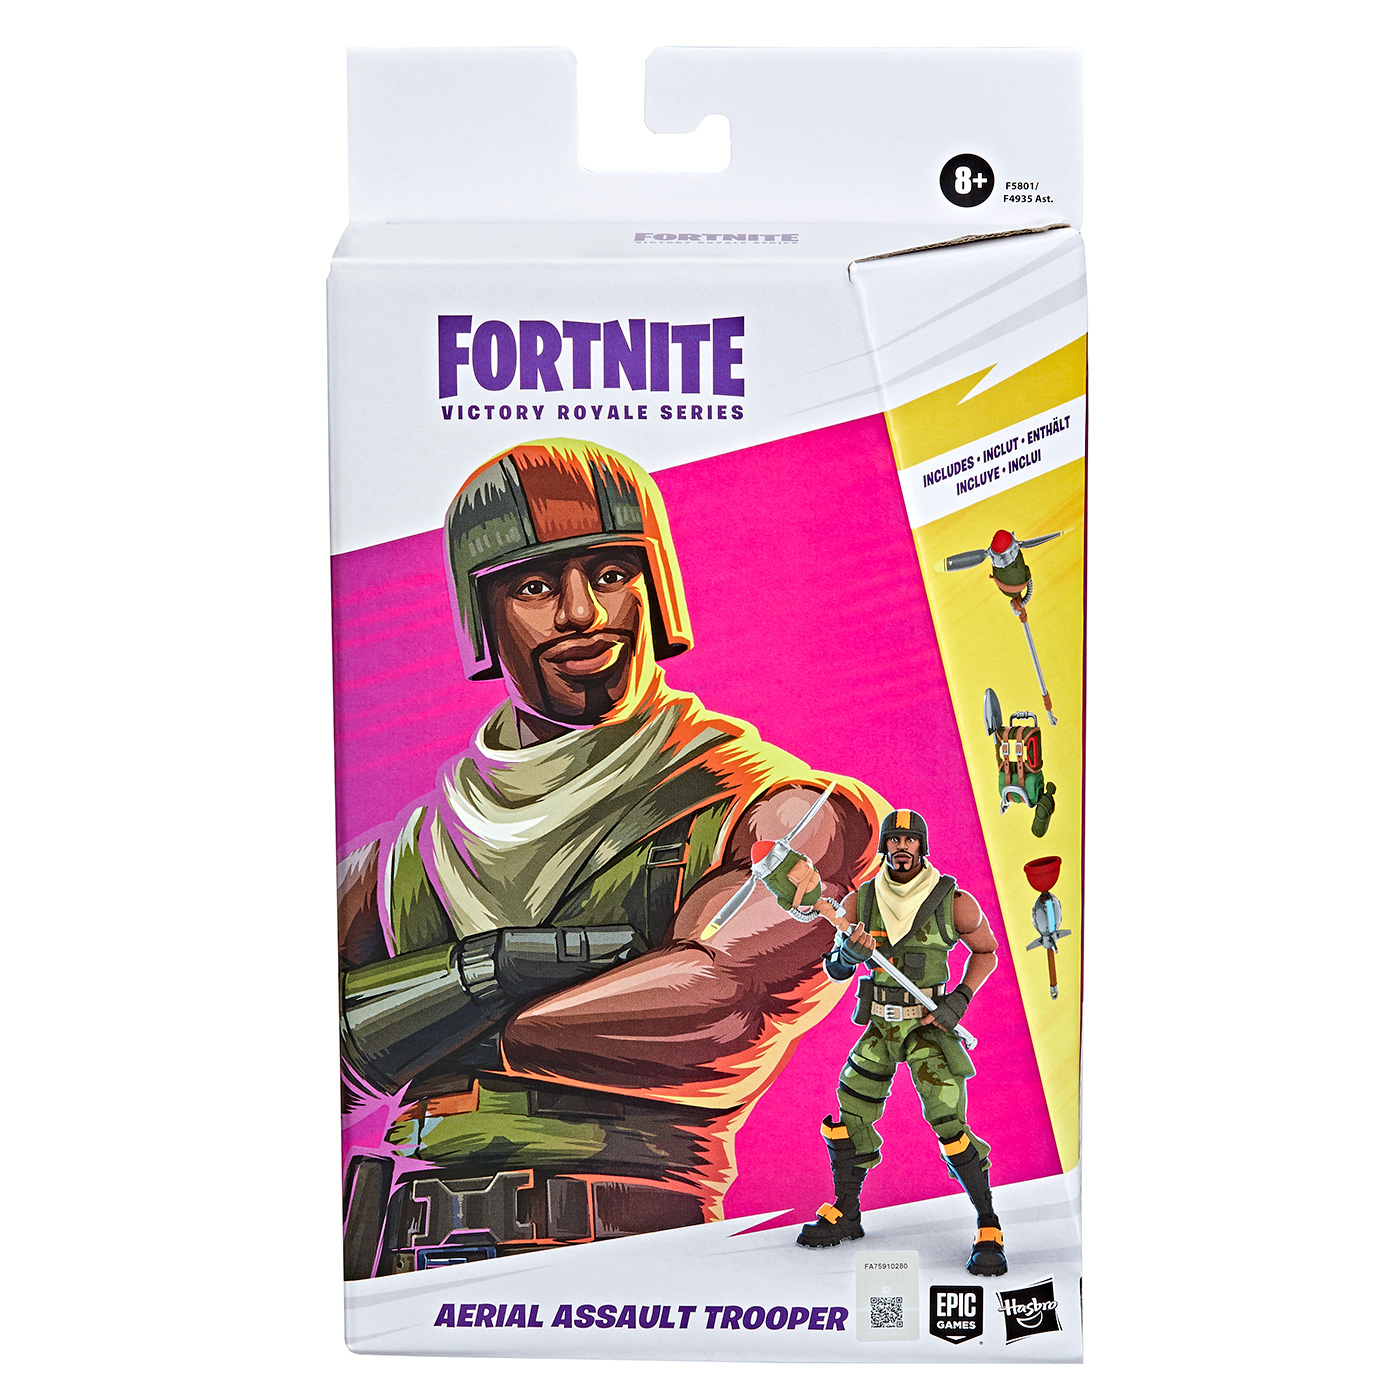 Fortnite Victory Royale Series 5.0 Aerial Assault Trooper 6-Inch Action Figure画像